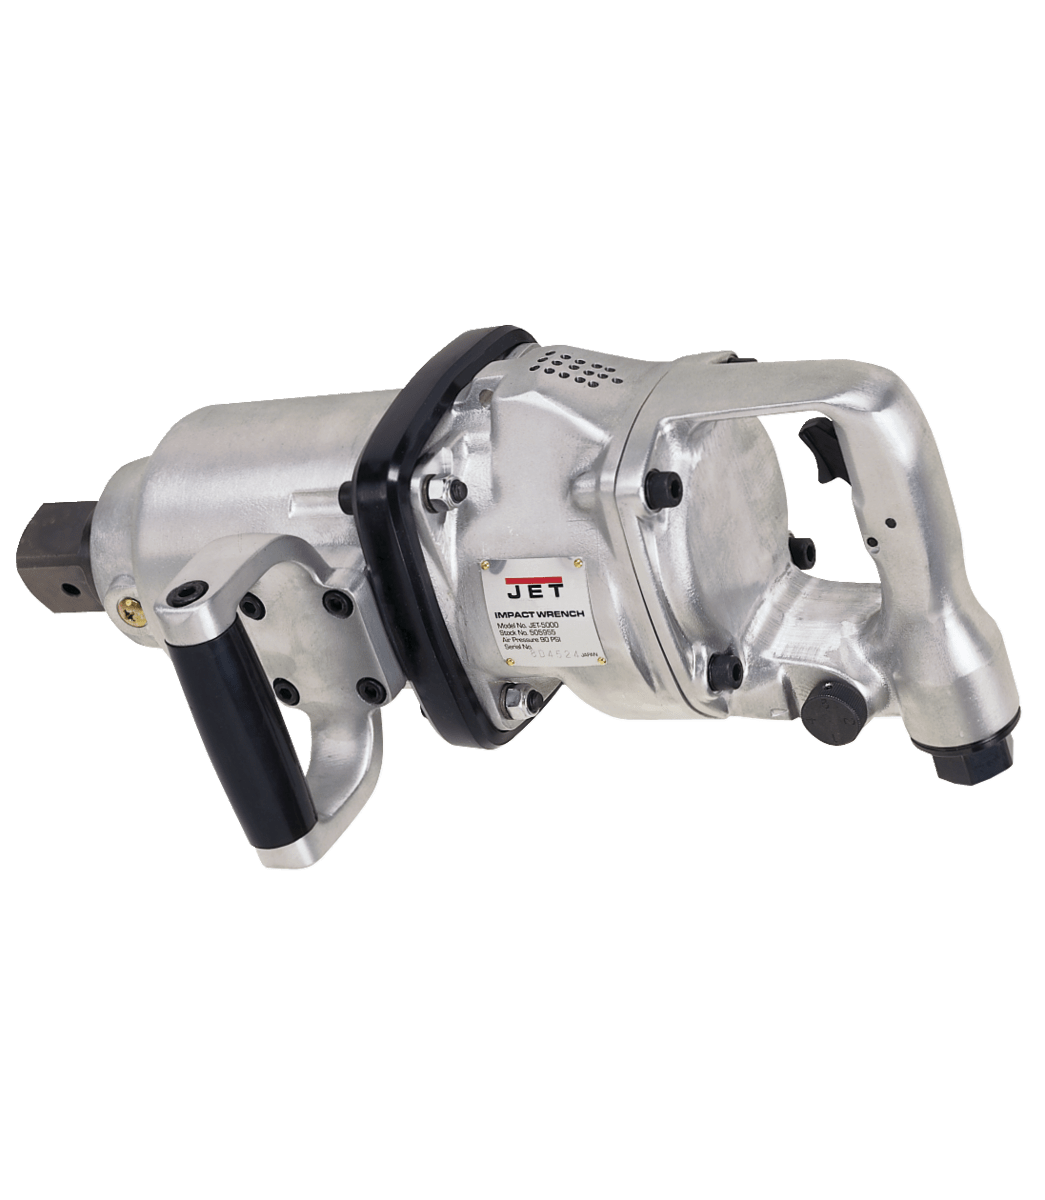 2" D-Handle Impact Wrench - Jet